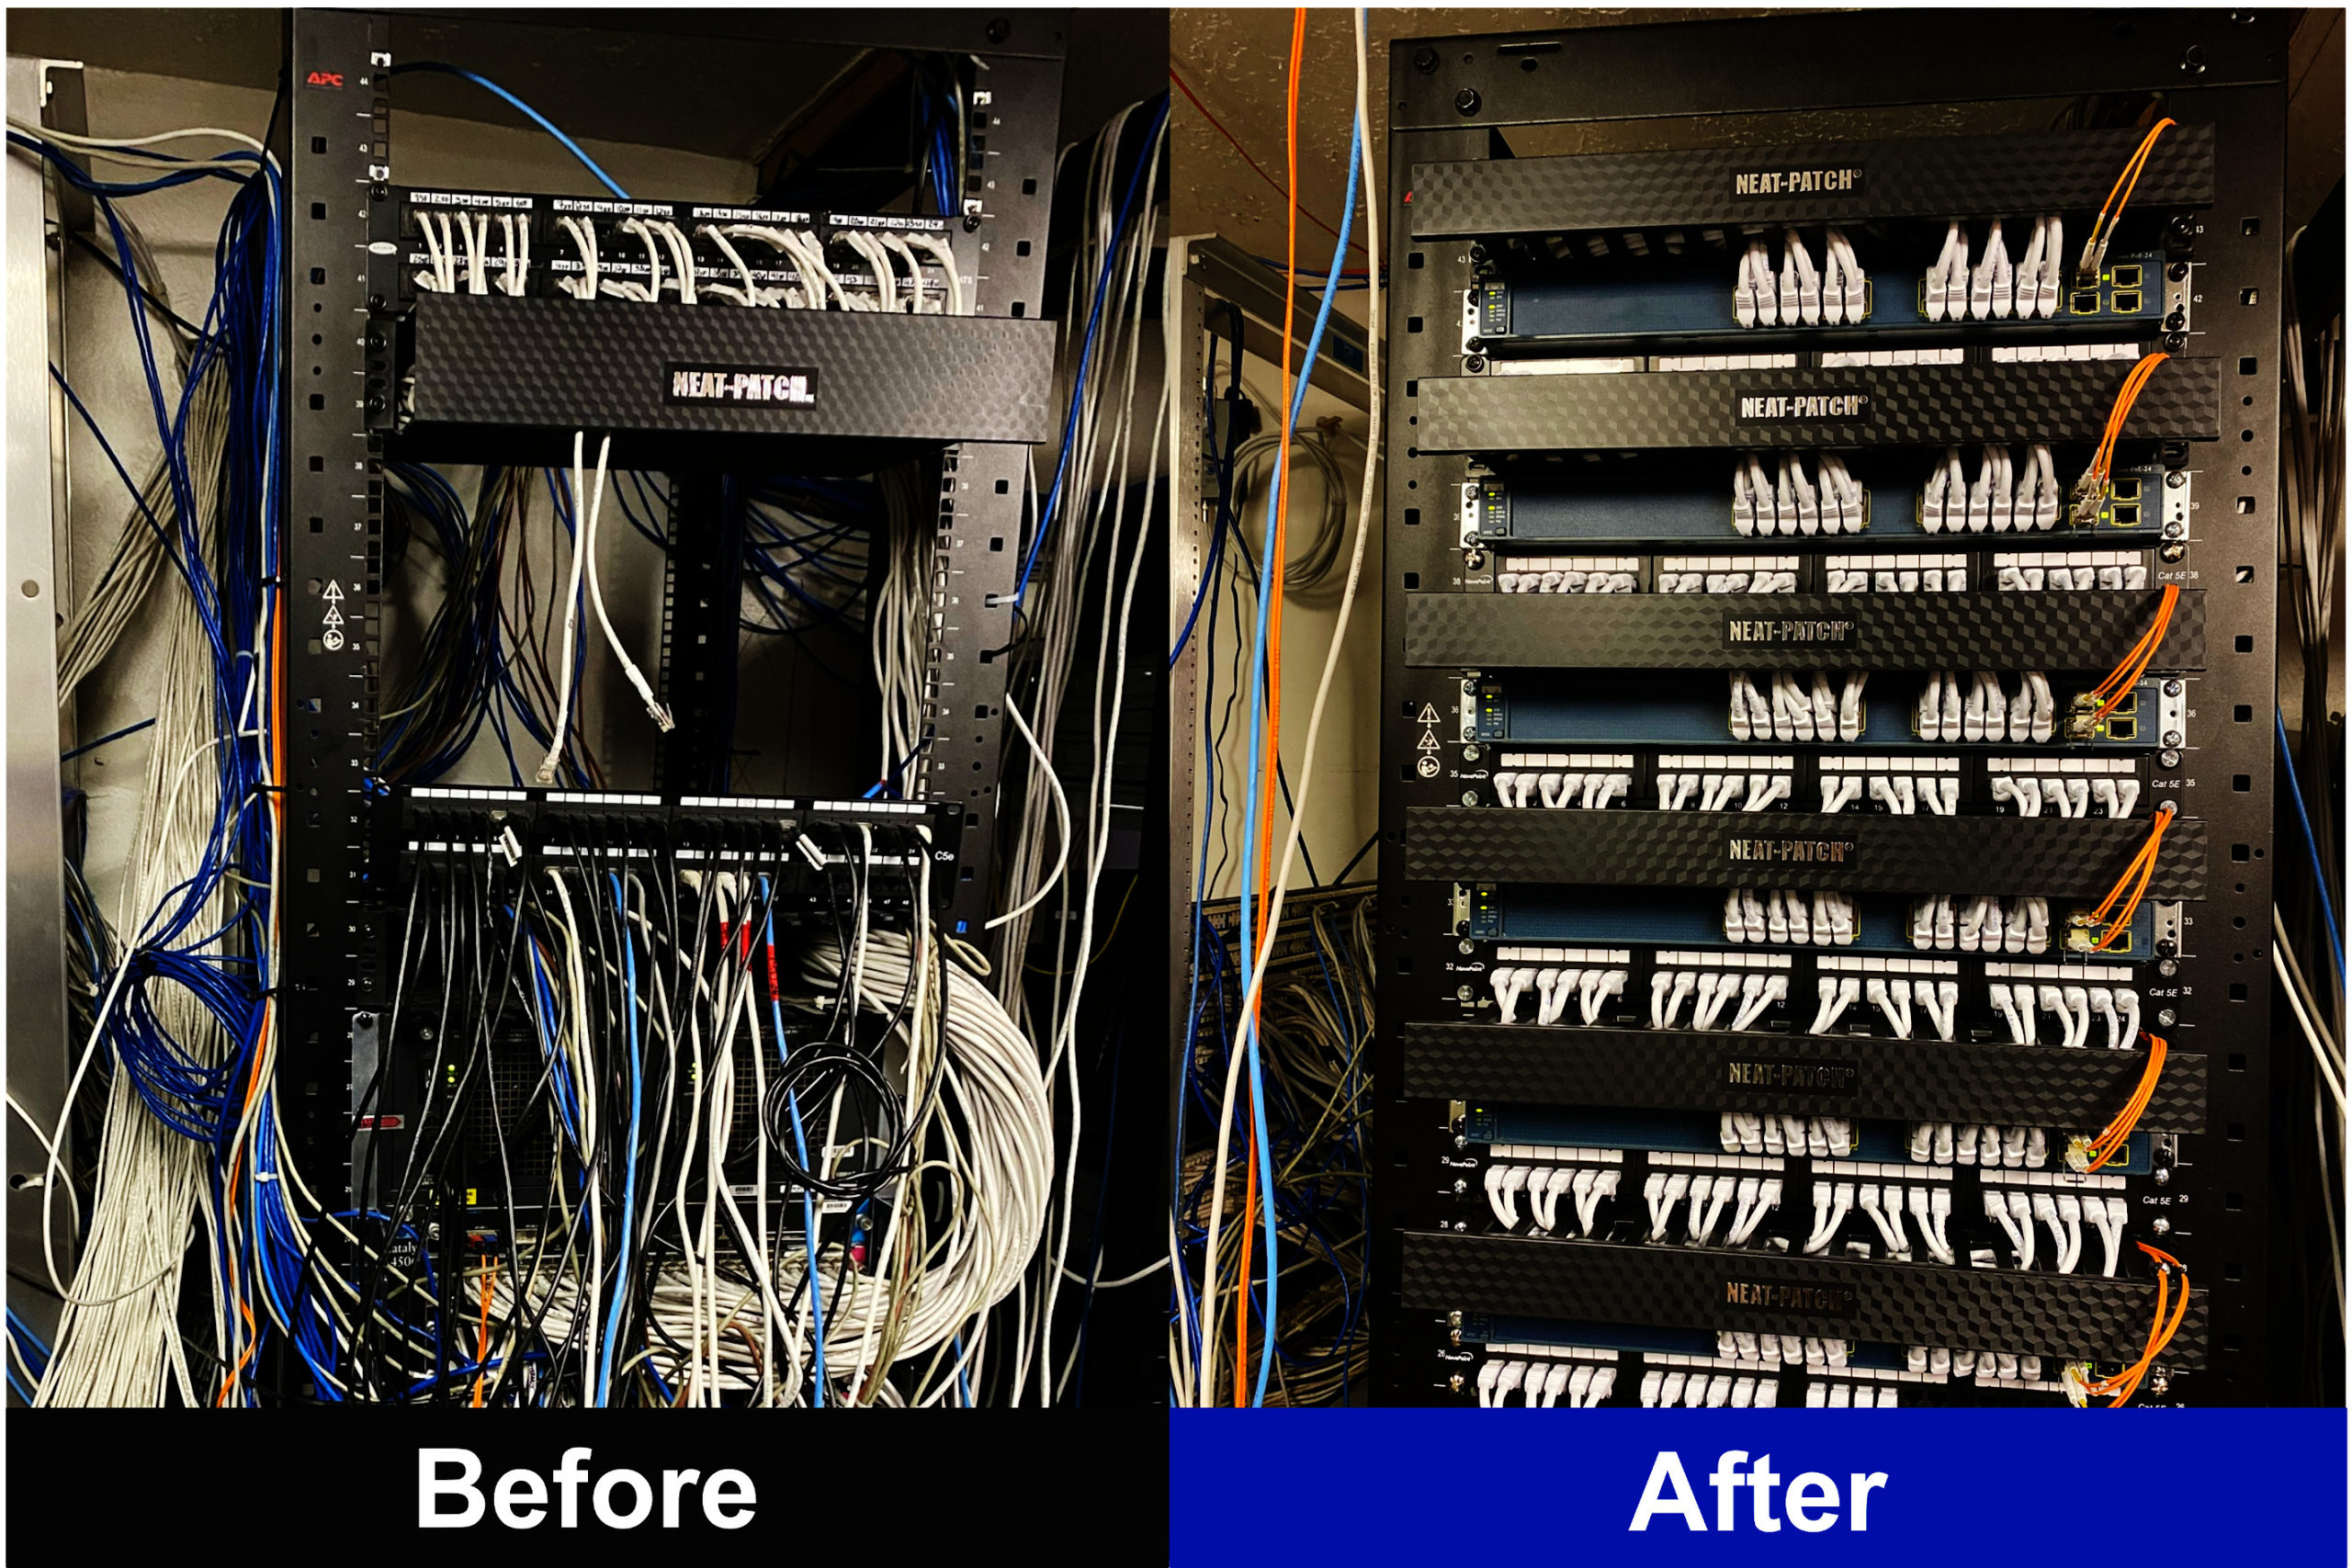 greysquare it services network cabling before and after